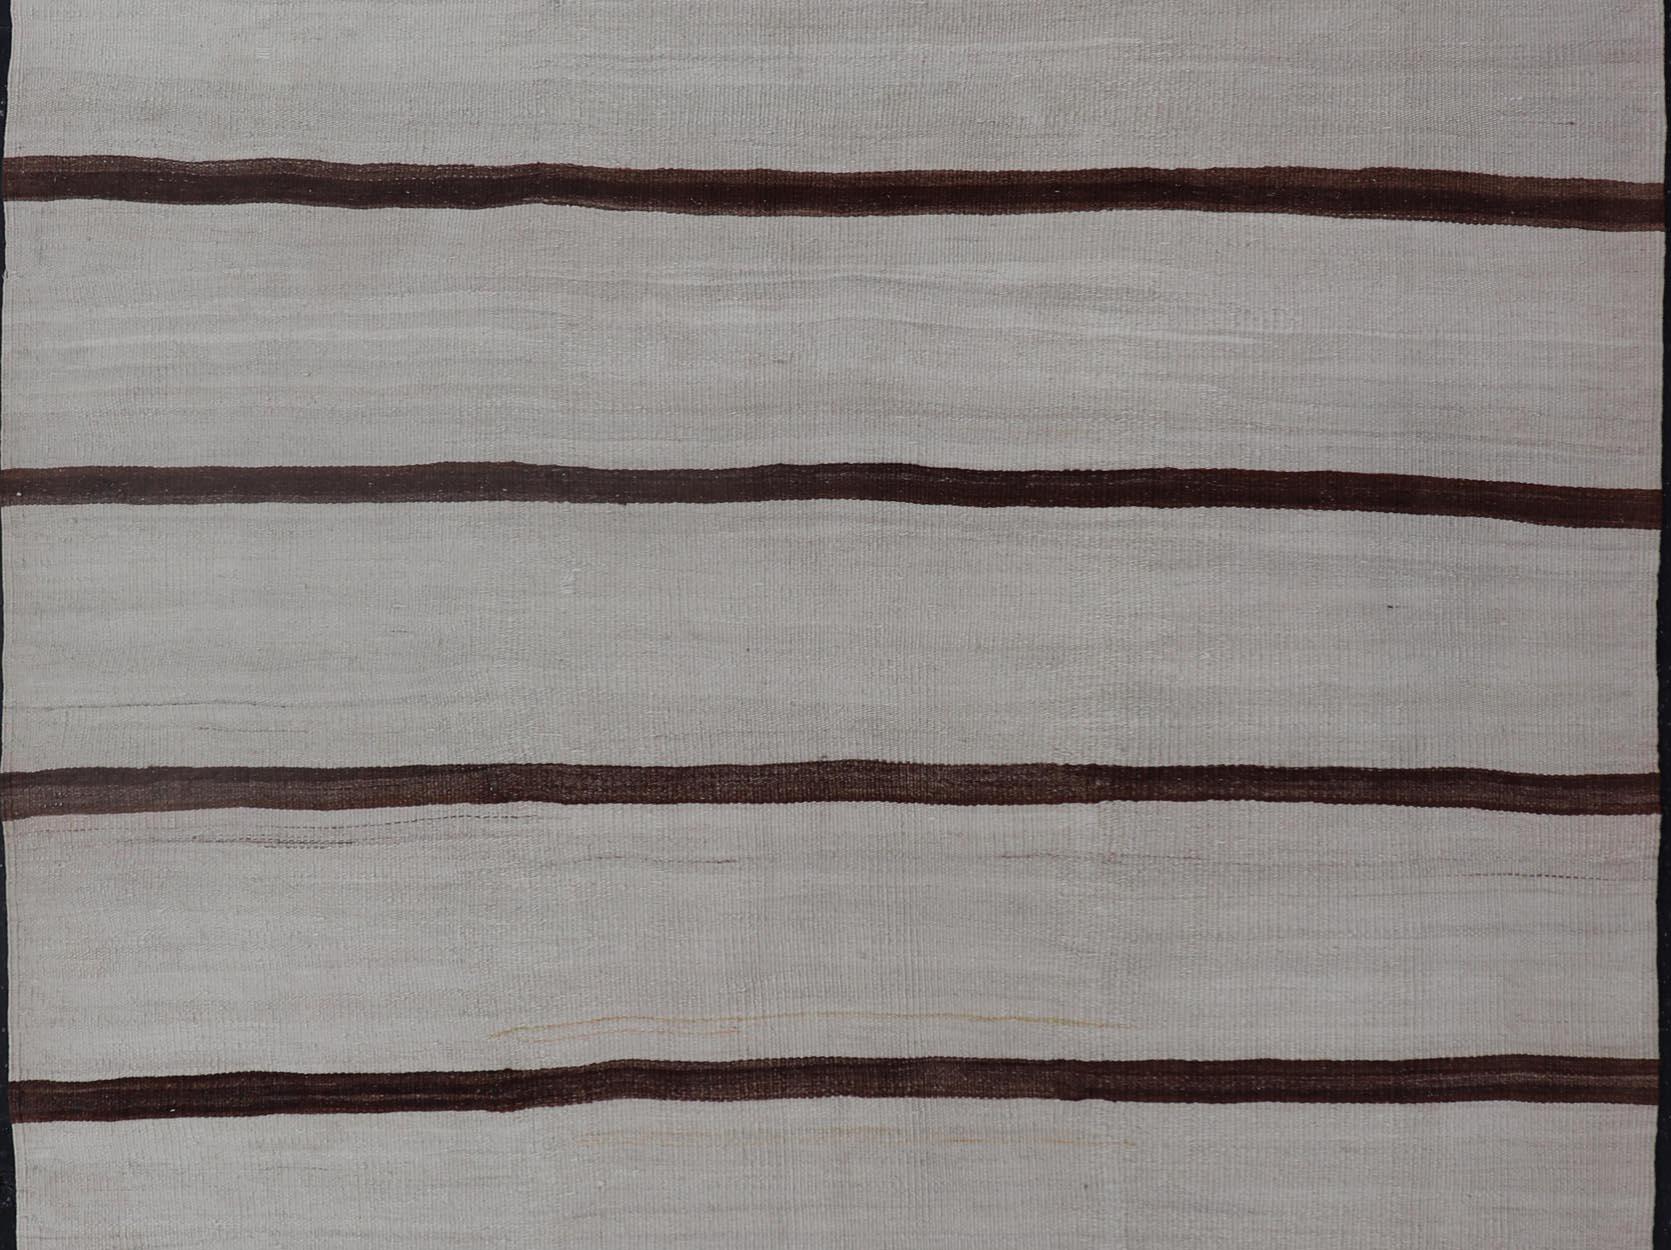 Hand-Woven Turkish Vintage Kilim in Shades of Brown and Ivory with Stripe Design For Sale